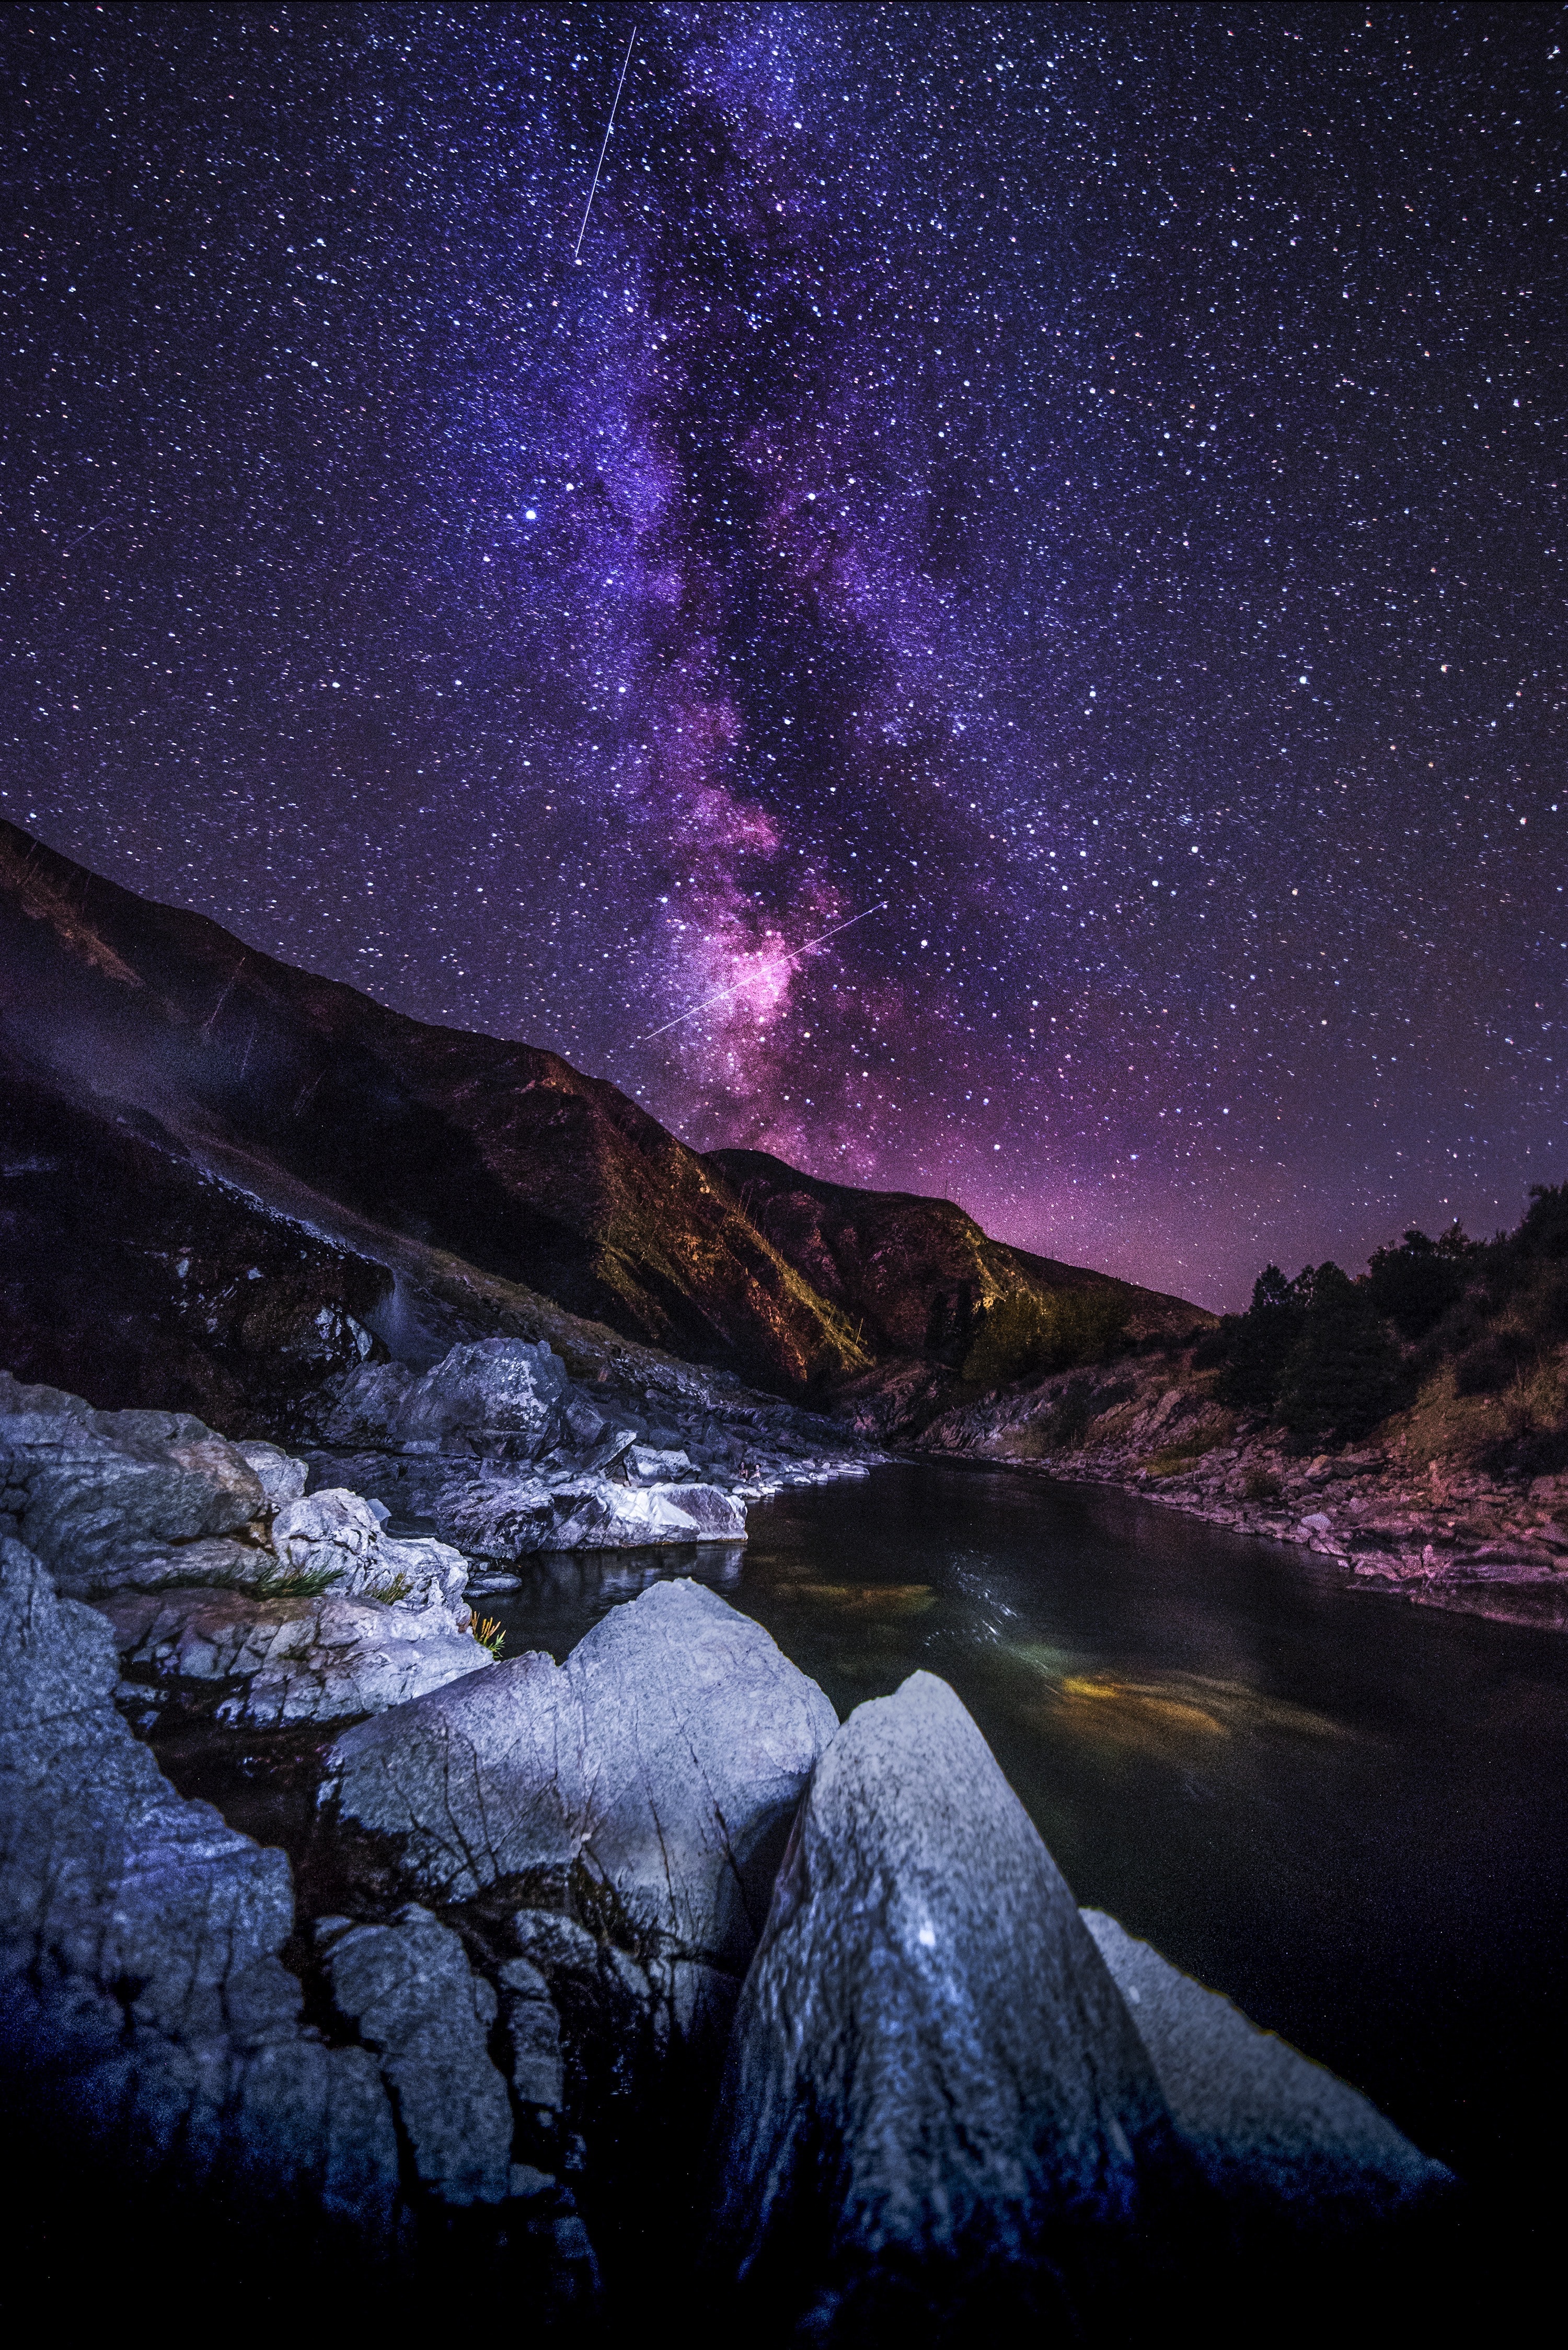 rivers, starry sky, nature, landscape, mountains, night